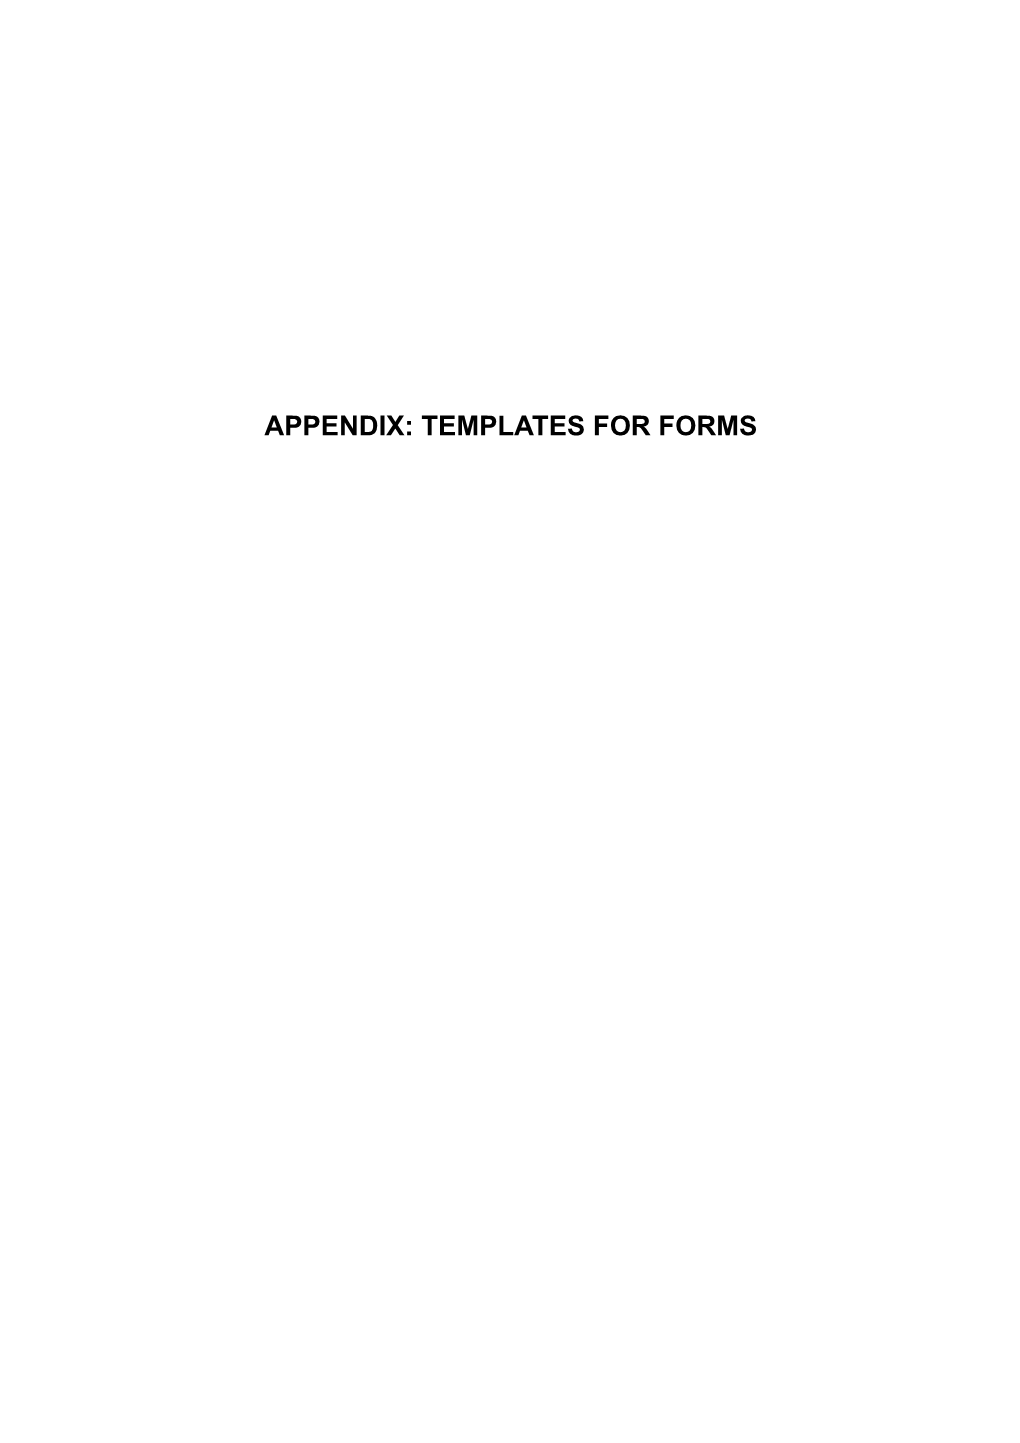 Appendix: Templates for Forms